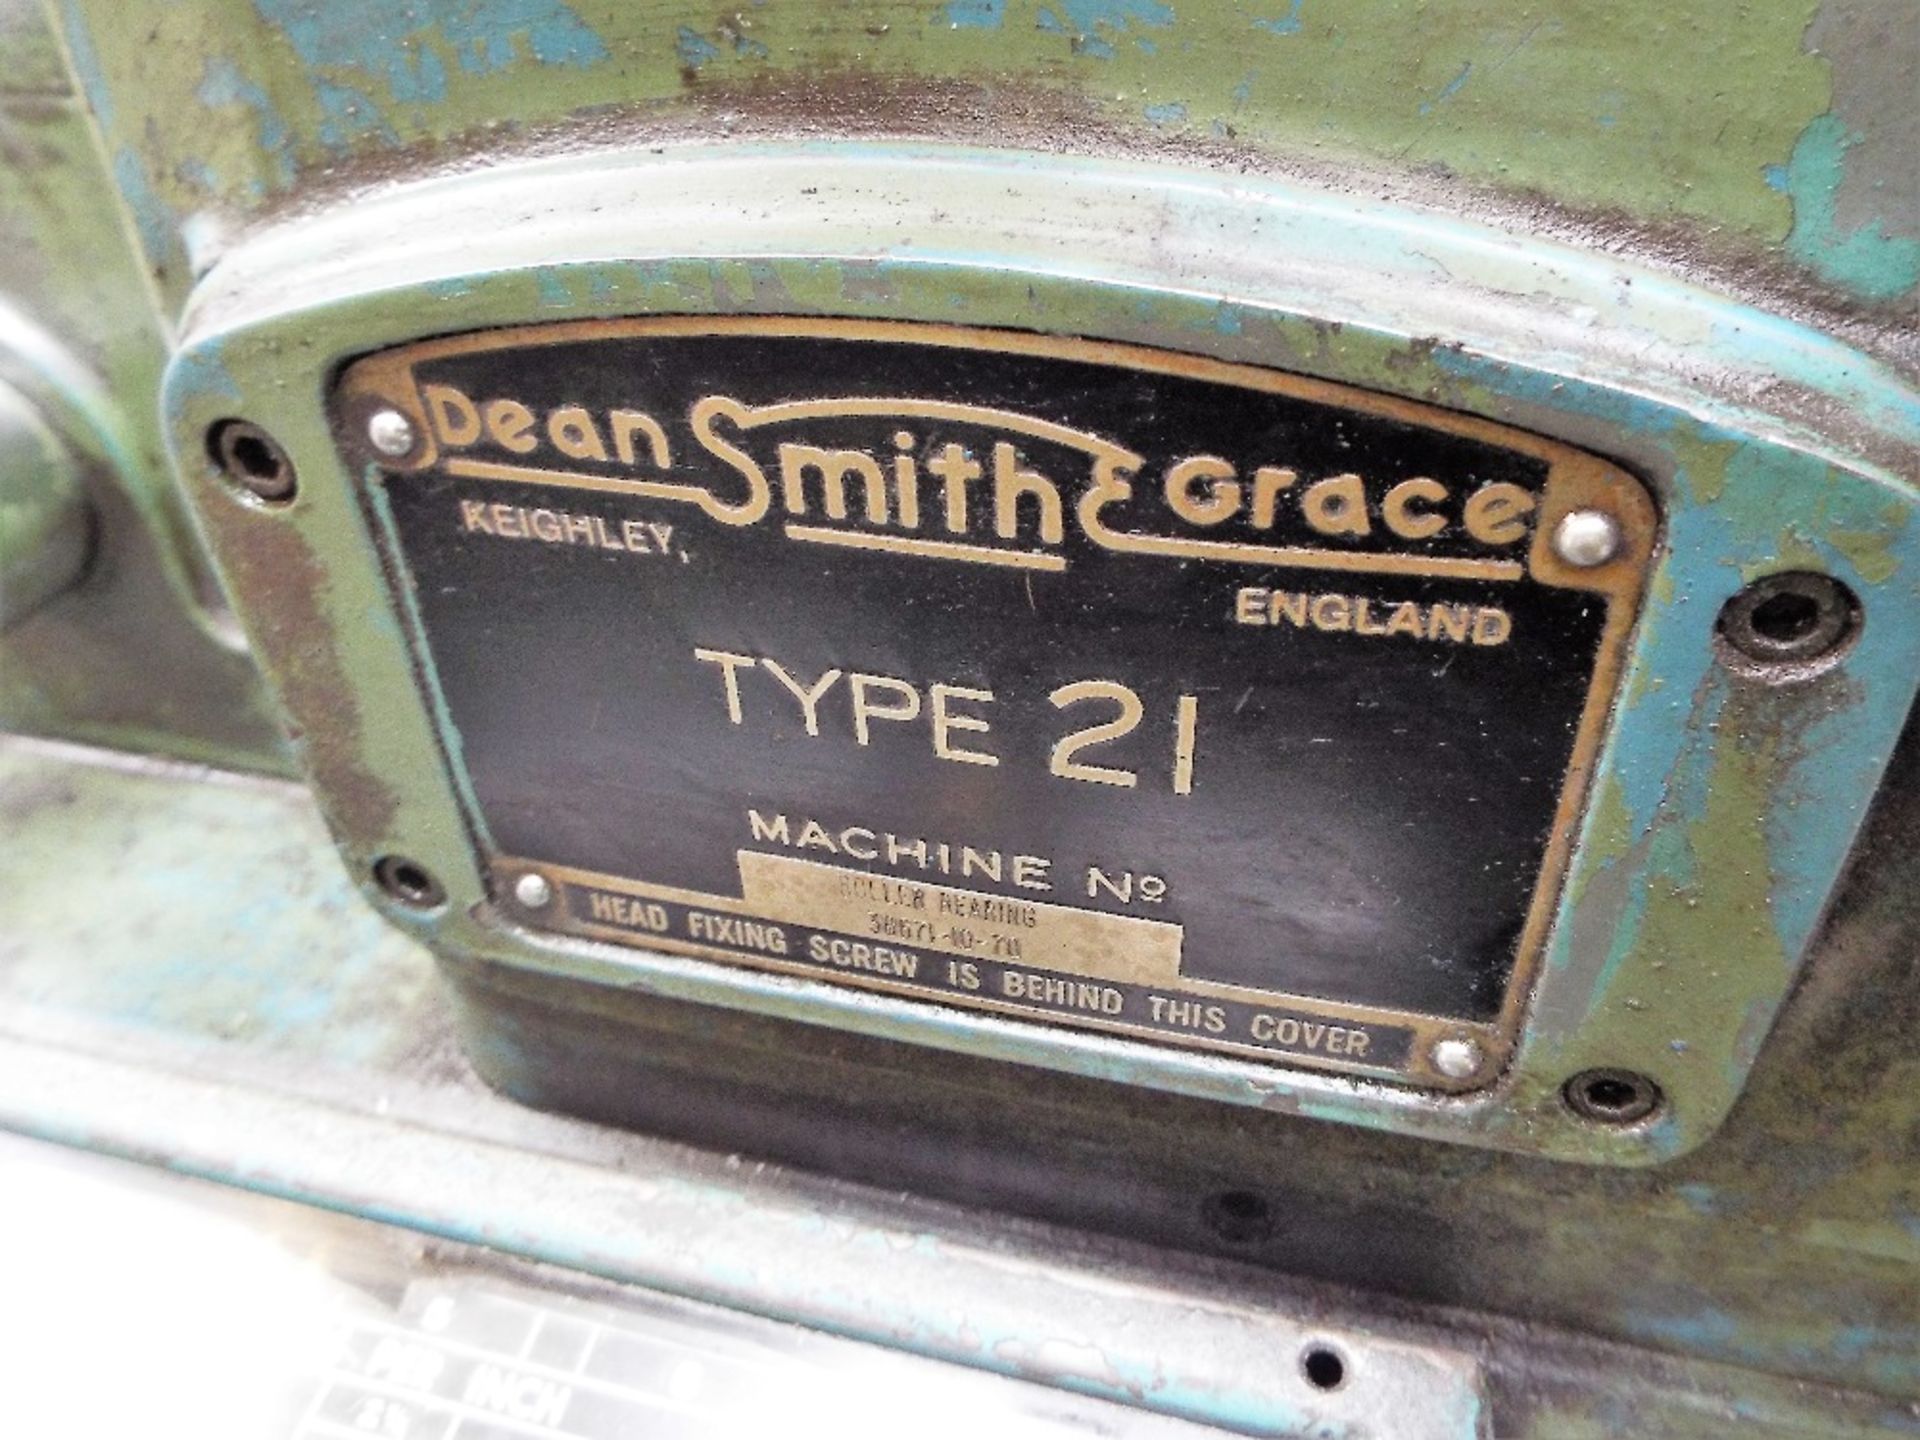 Dean Smith & Grace Type 21 Gap Bed Lathe - Image 3 of 18